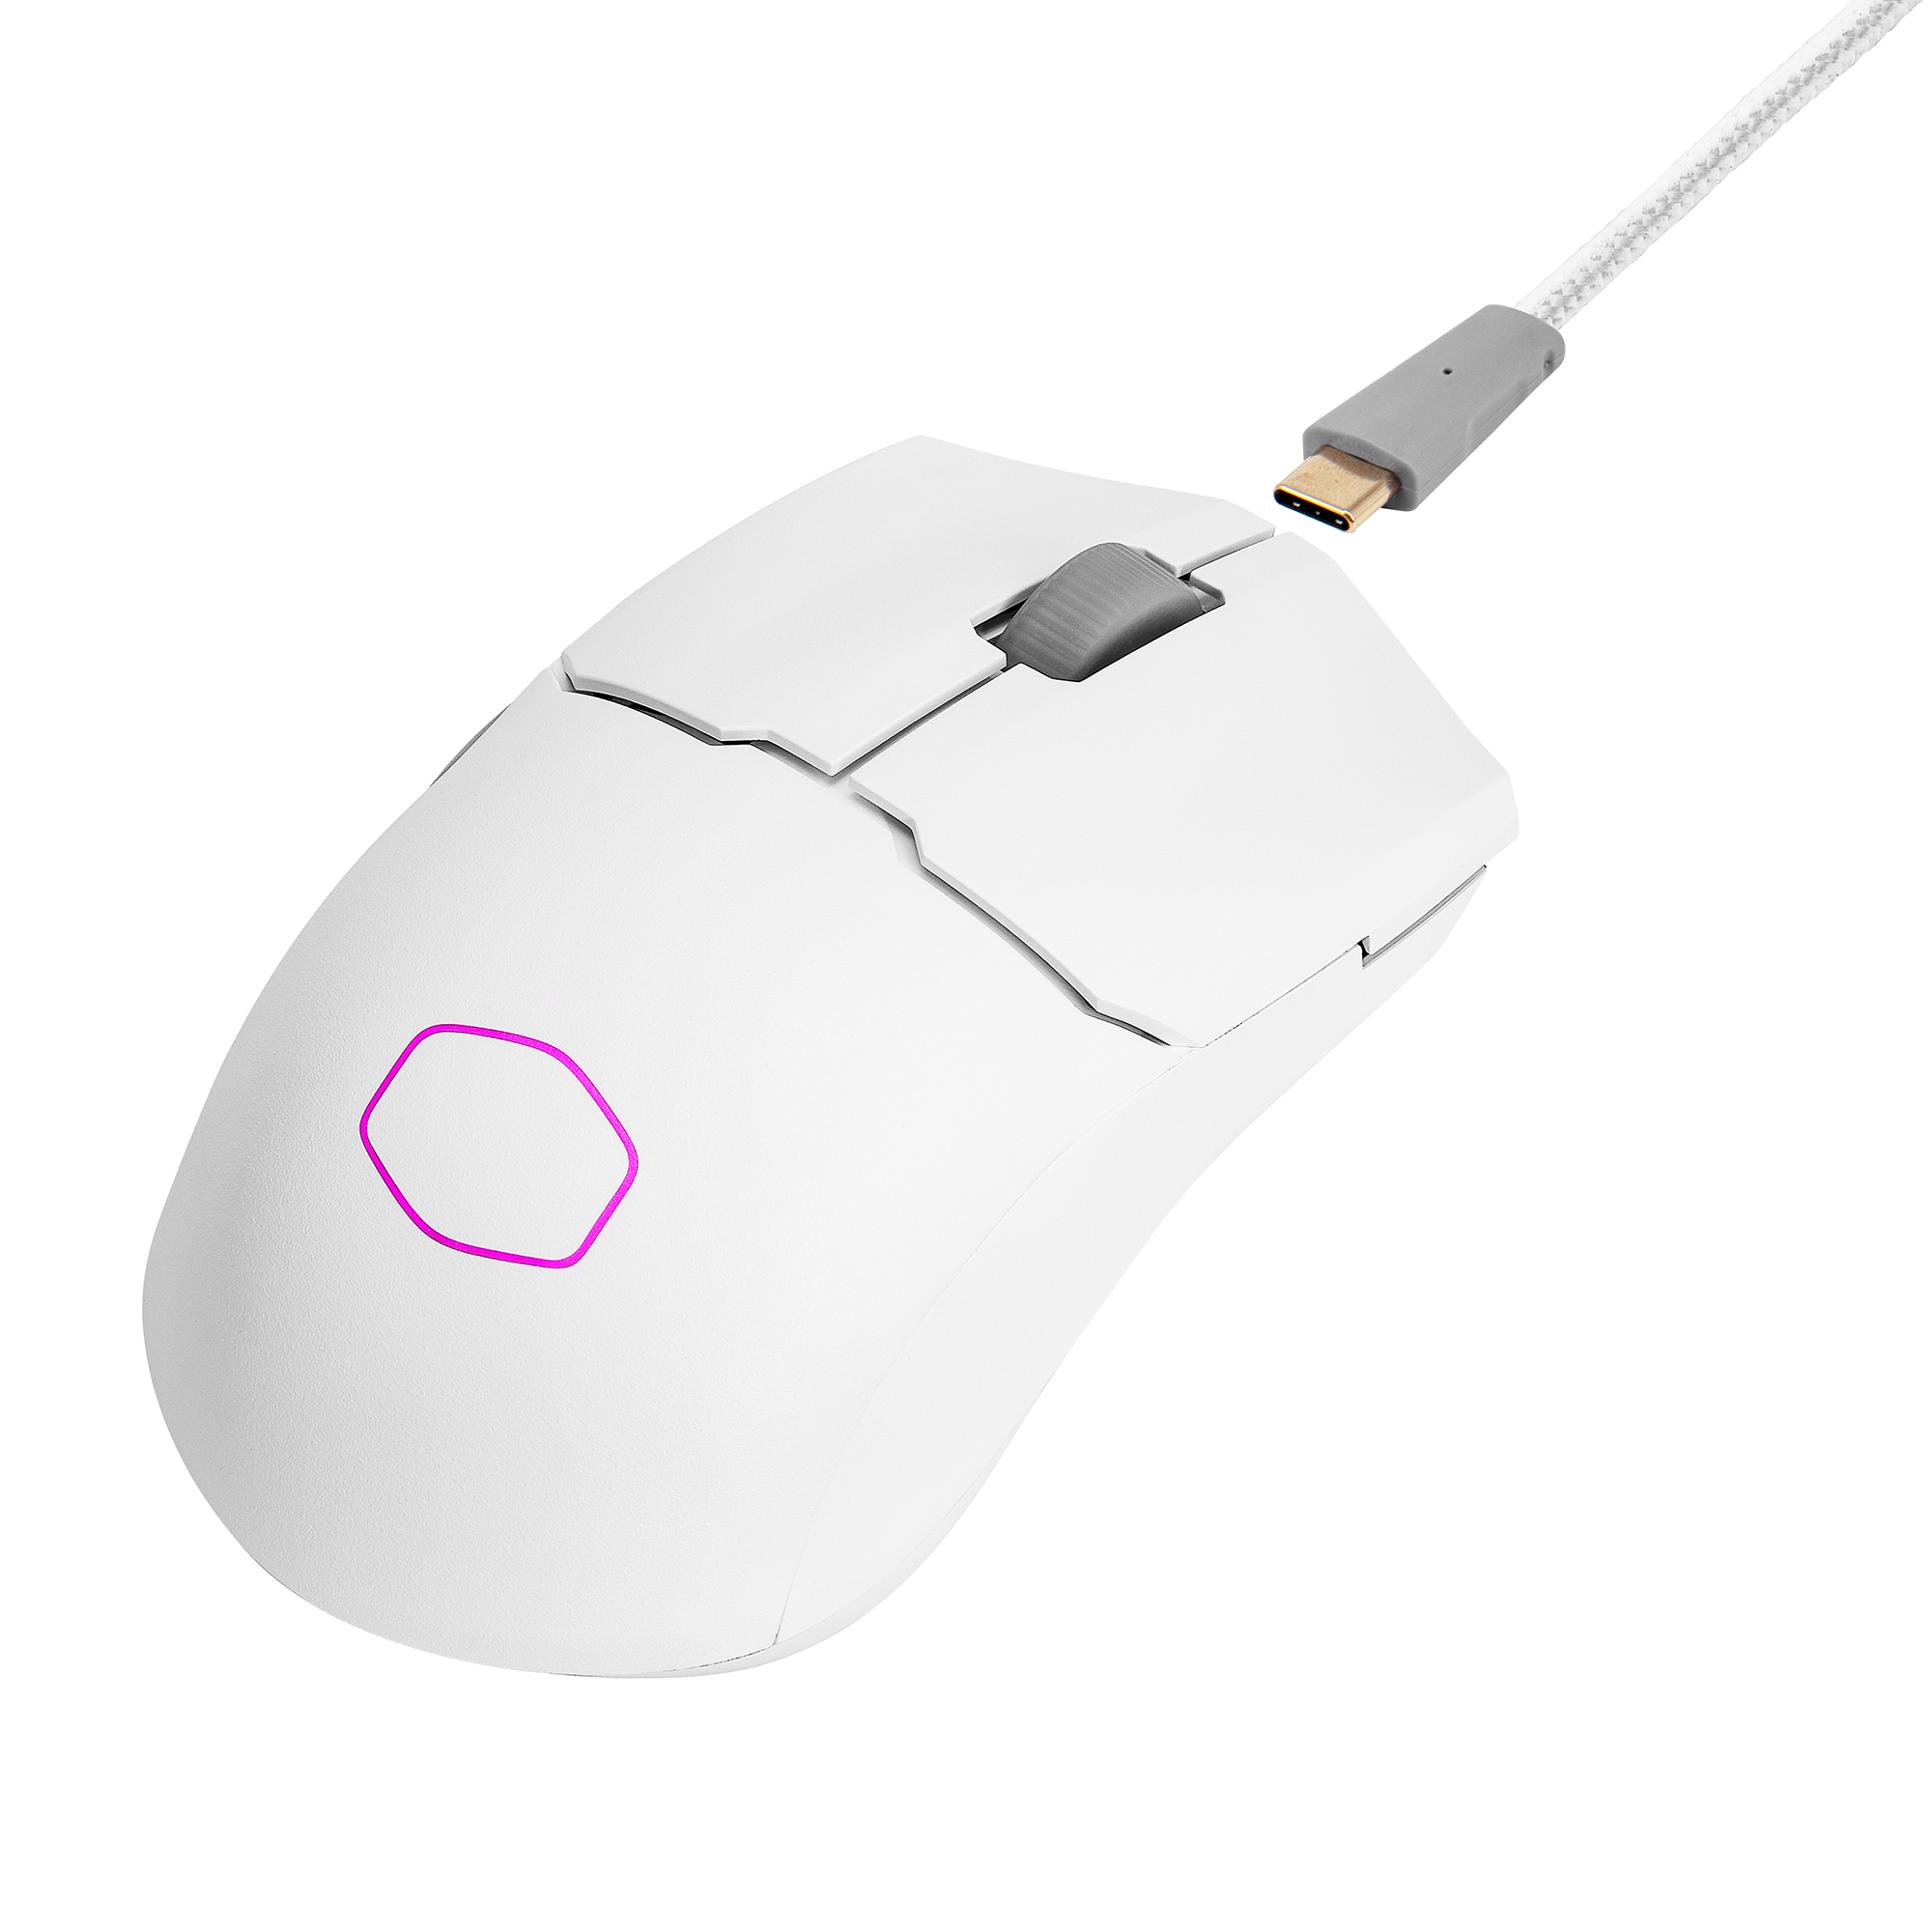 Cooler Master MM712 Hybrid Wireless Ultra Light RGB Gaming Mouse - White